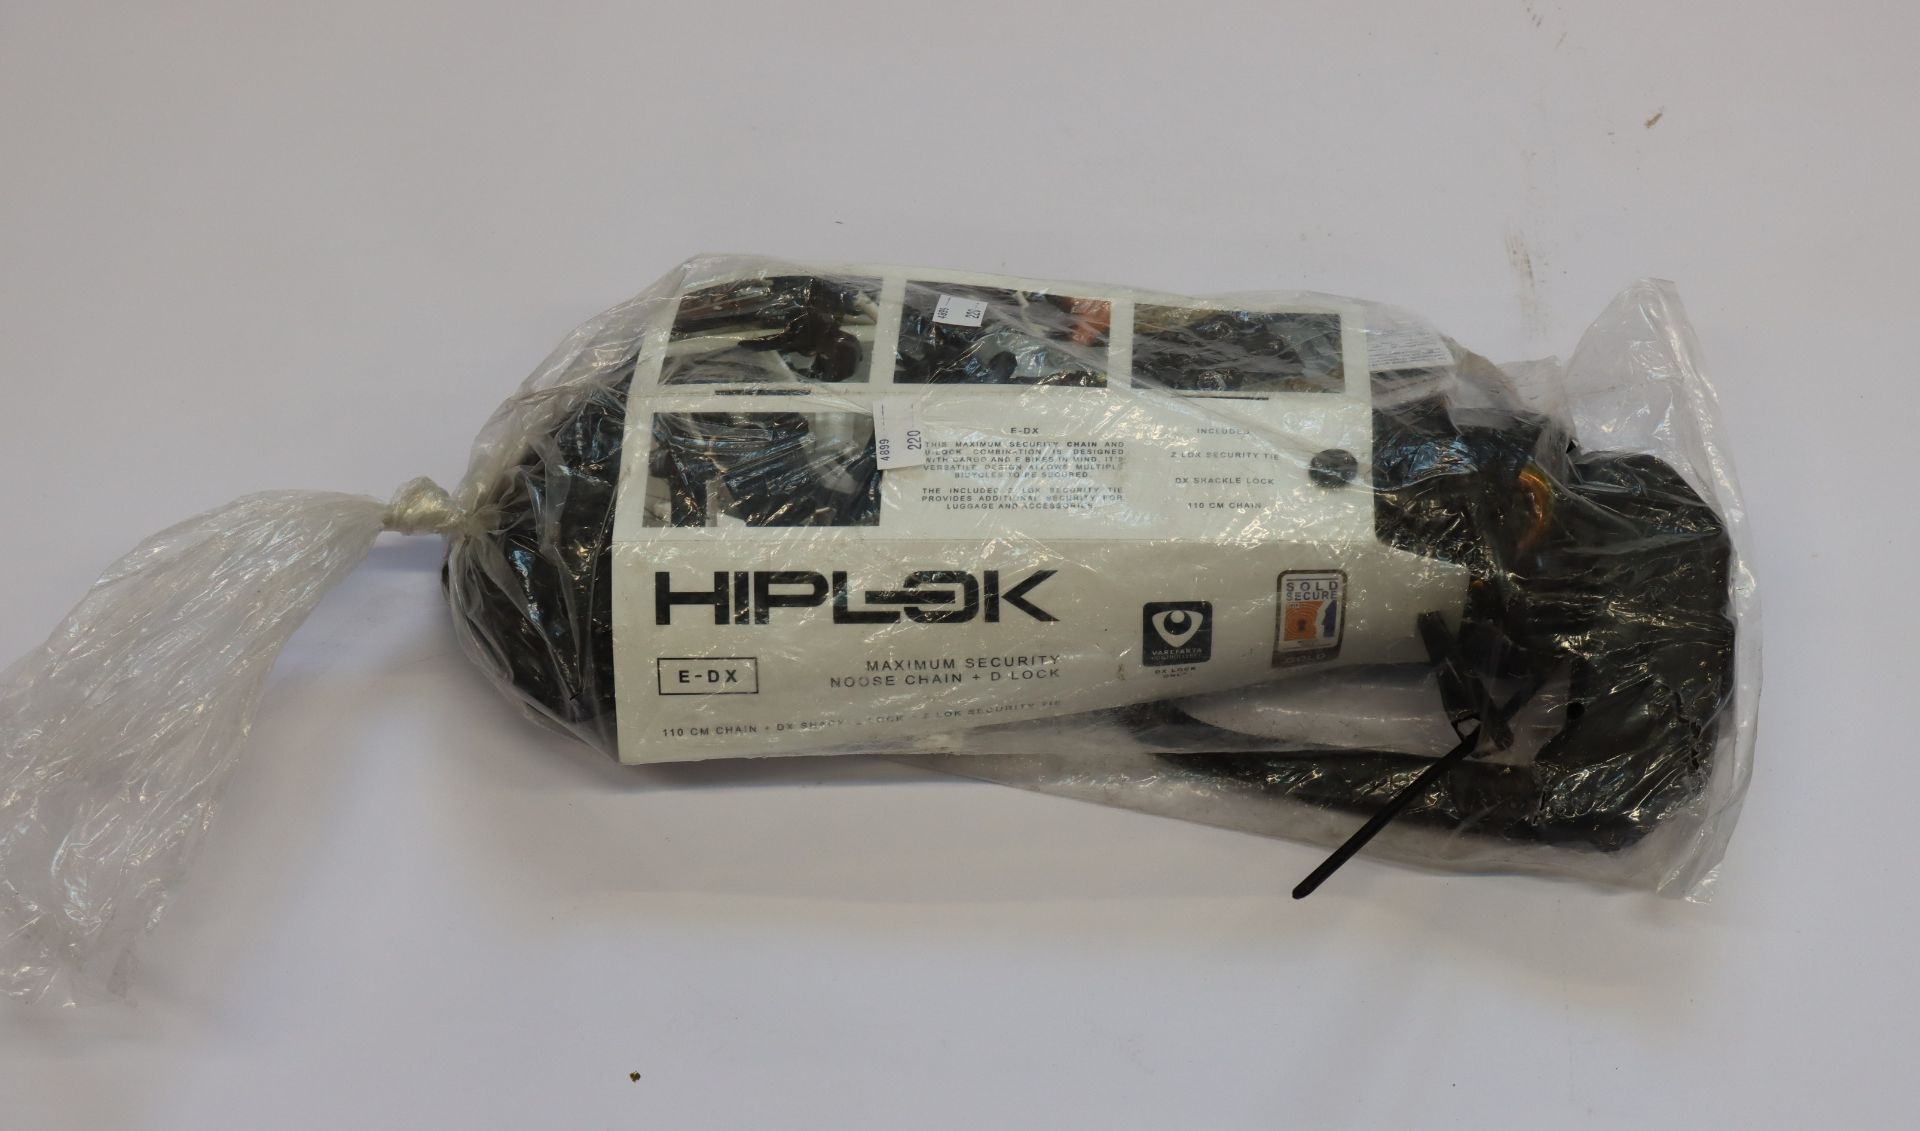 An as new Hiplok E-DX maximum security noose chain and D lock.